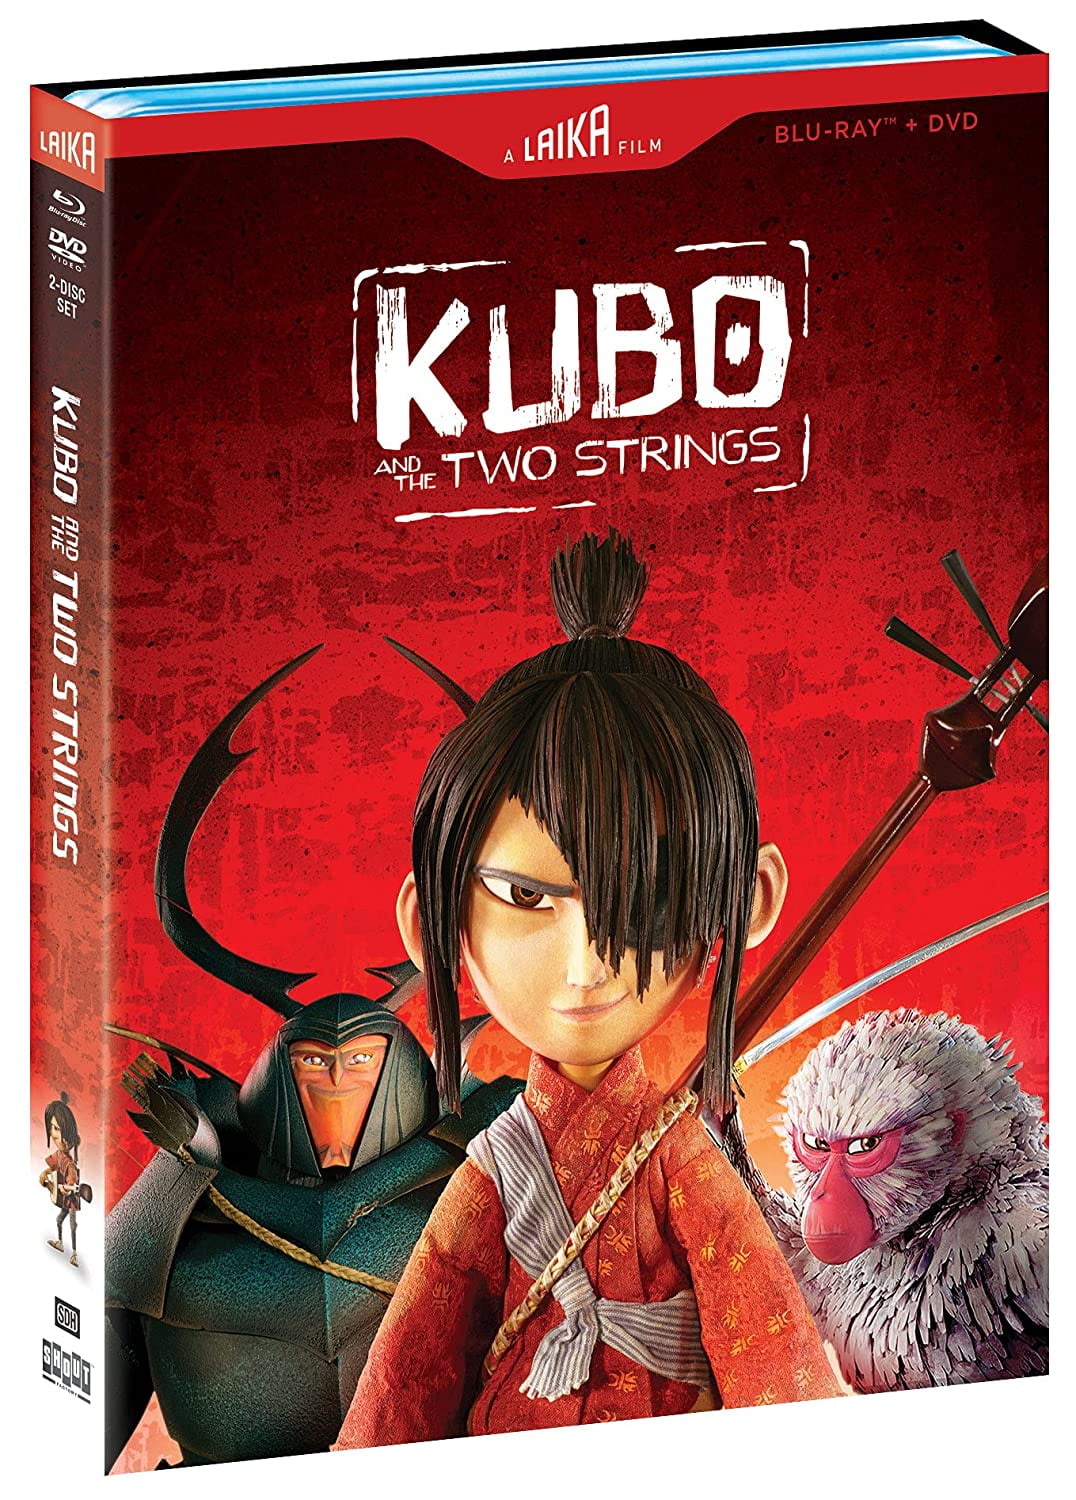 Kubo and the Two Strings (Laika Edition) (Blu-ray + DVD) 